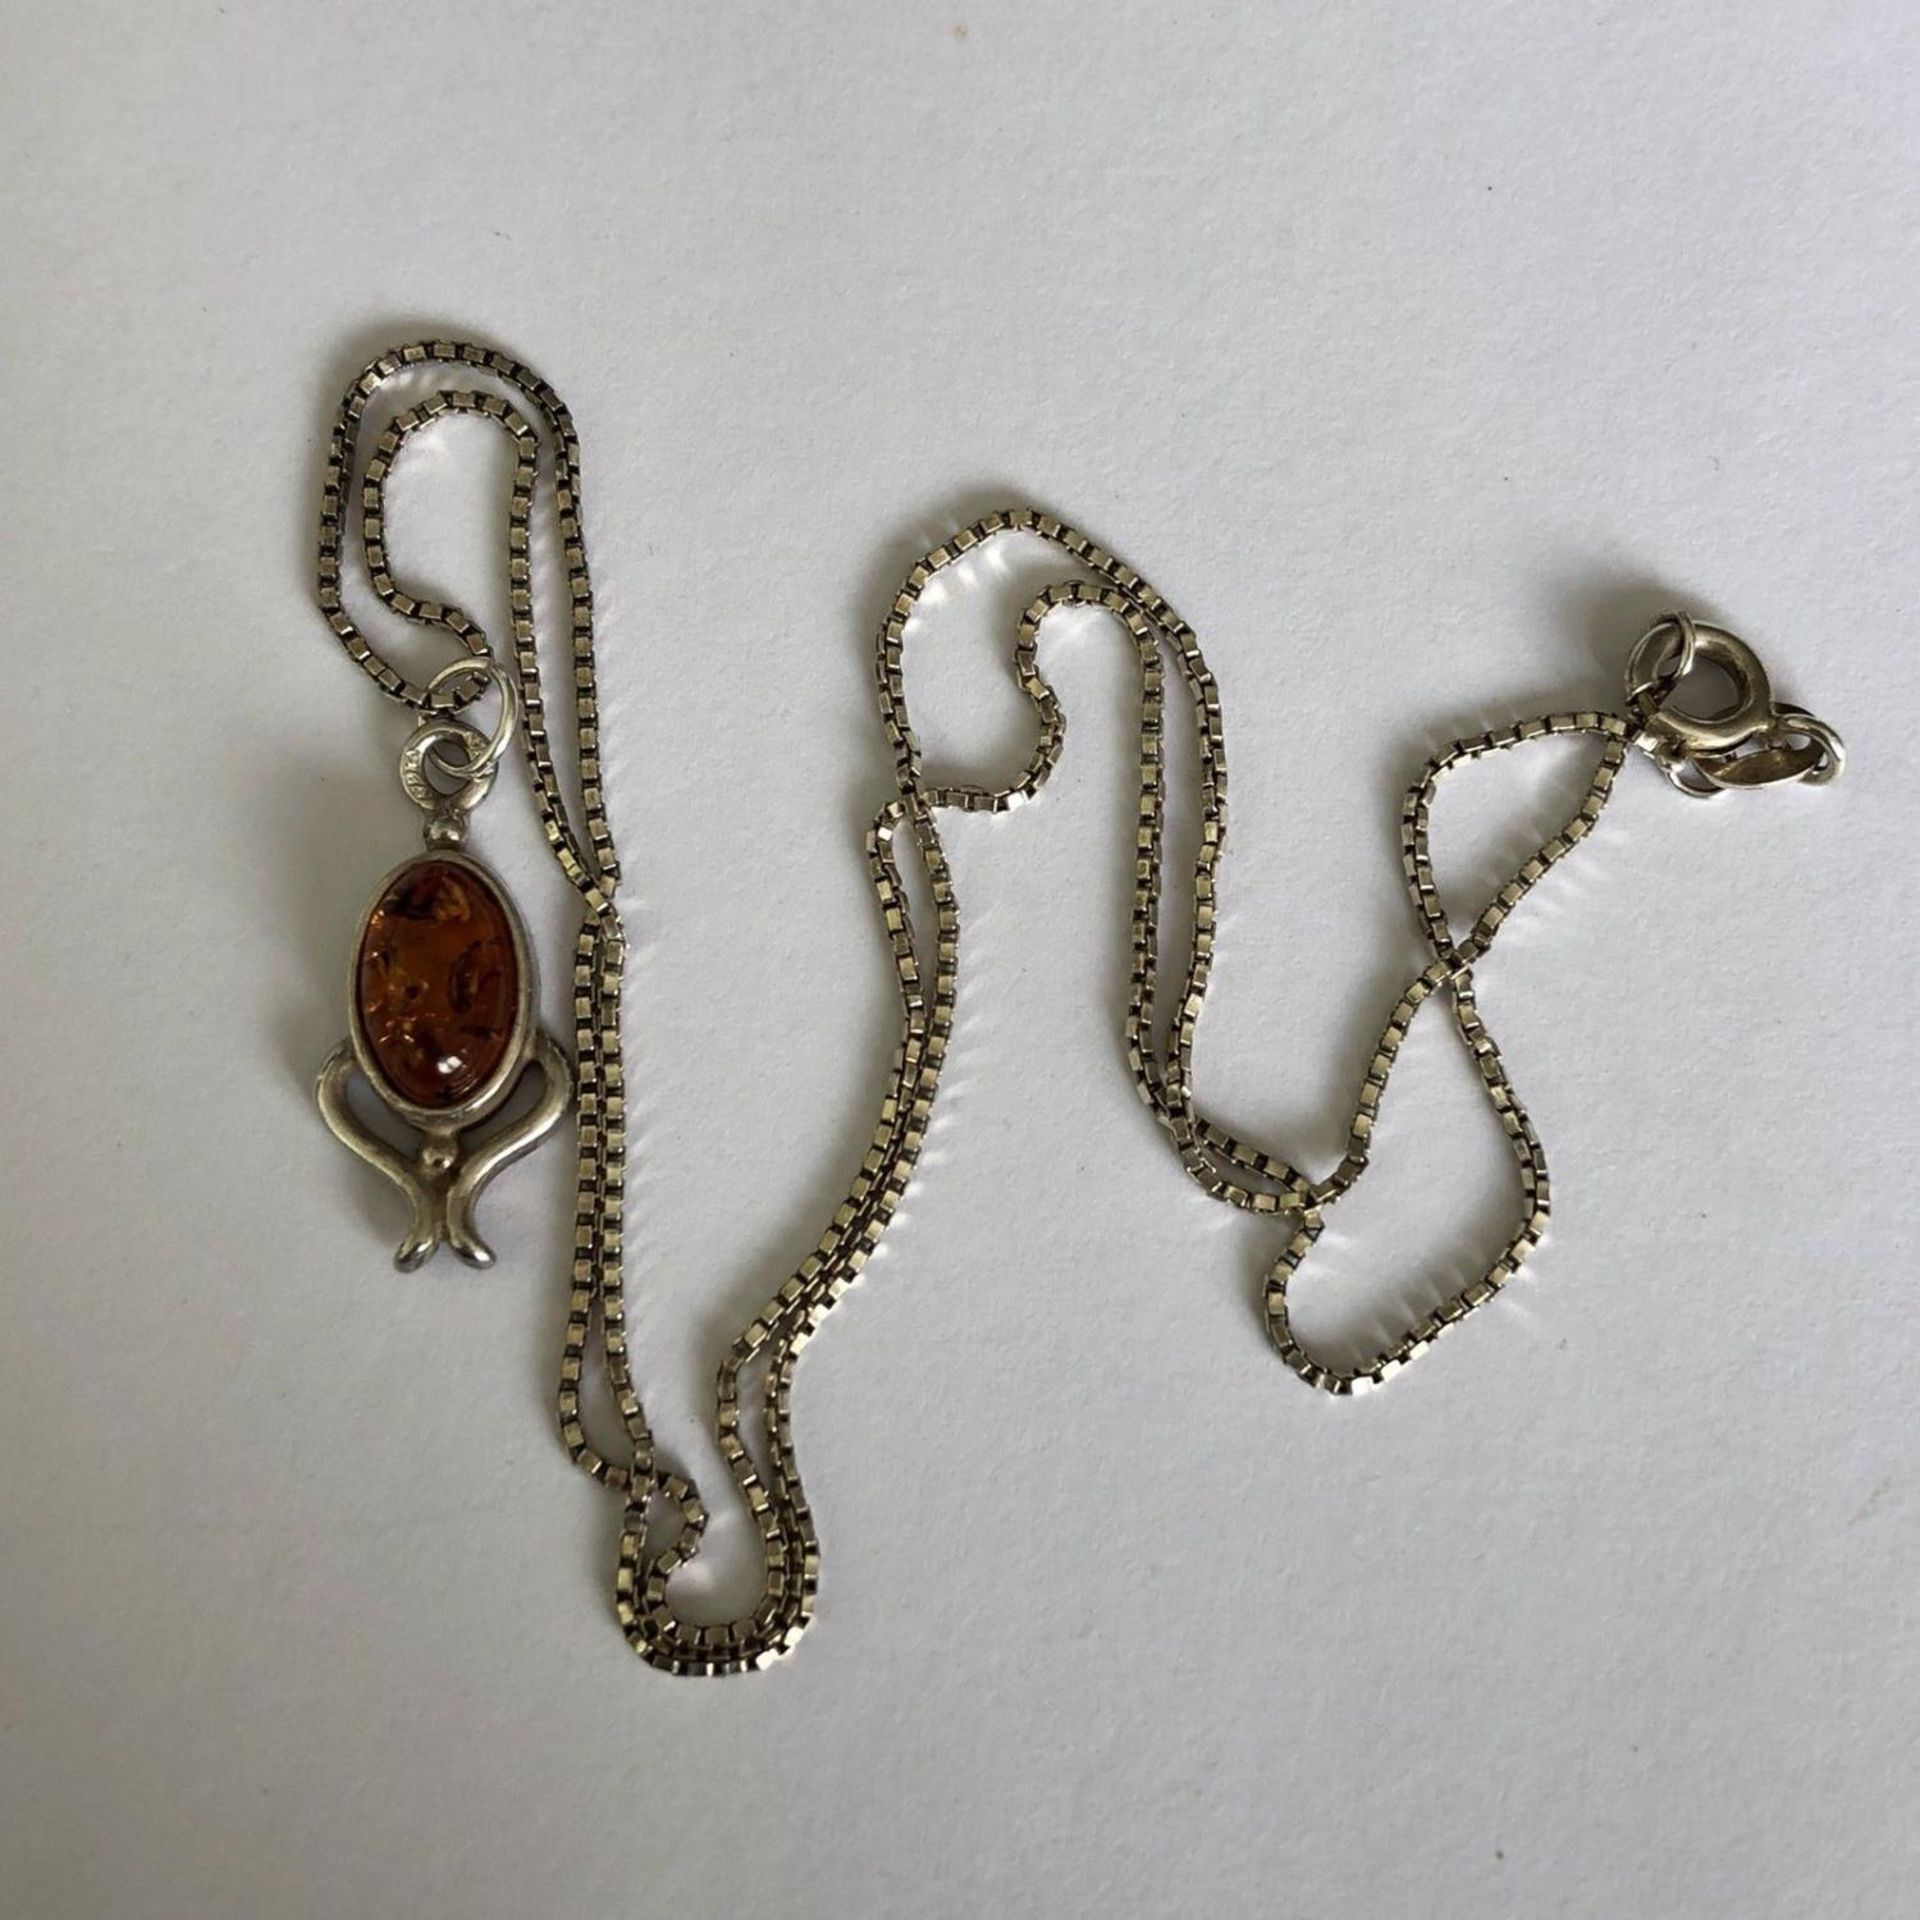 Silver and Baltic Amber Pendant on an 18 inch silver chain - Image 2 of 4